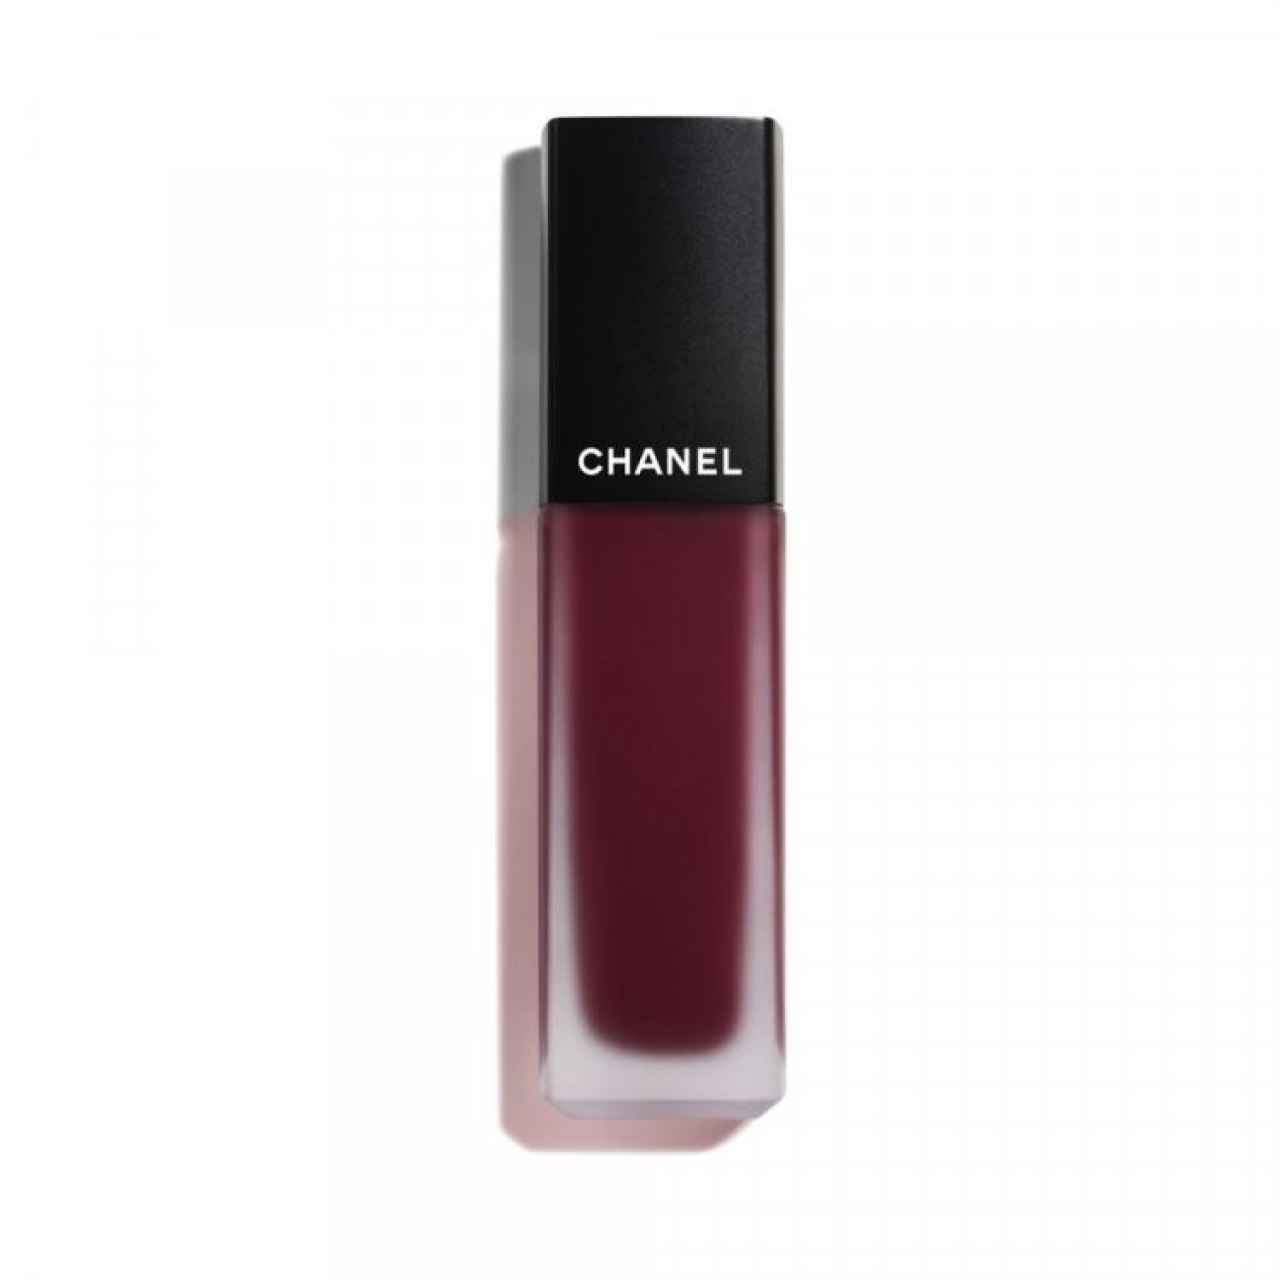 Rouge Allure Ink fusion 826, by Chanel.